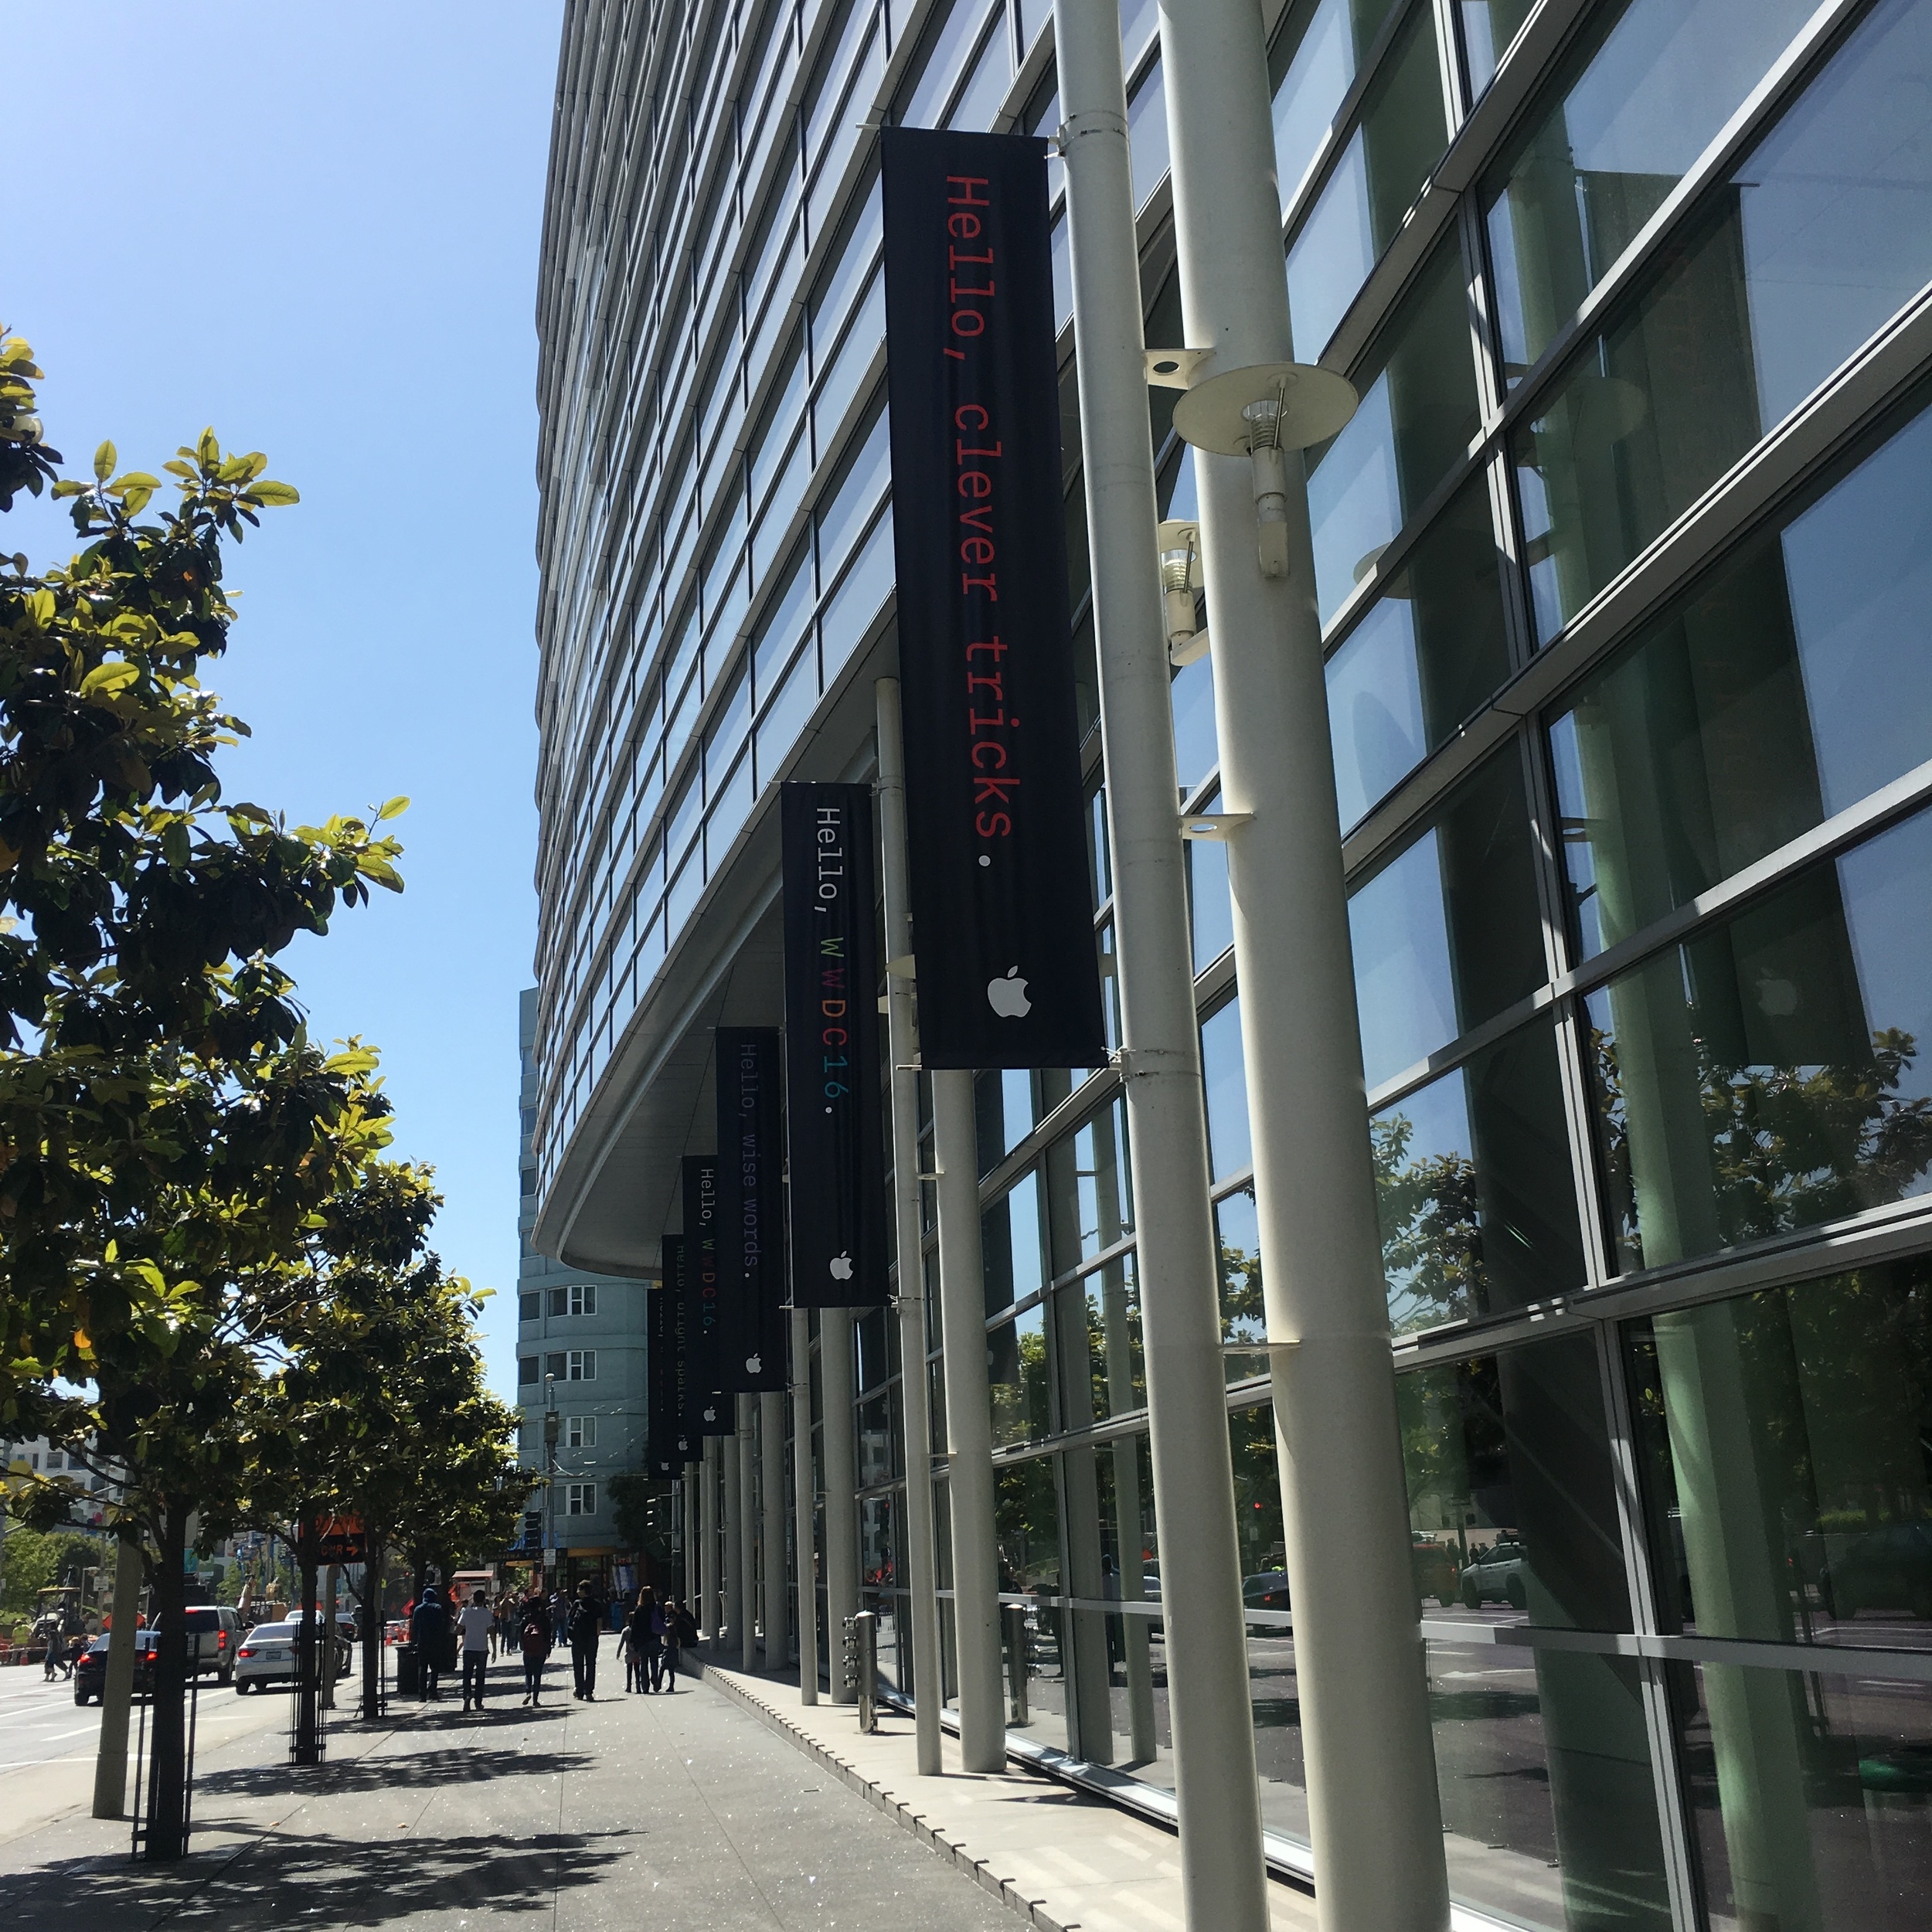 More Moscone Signage